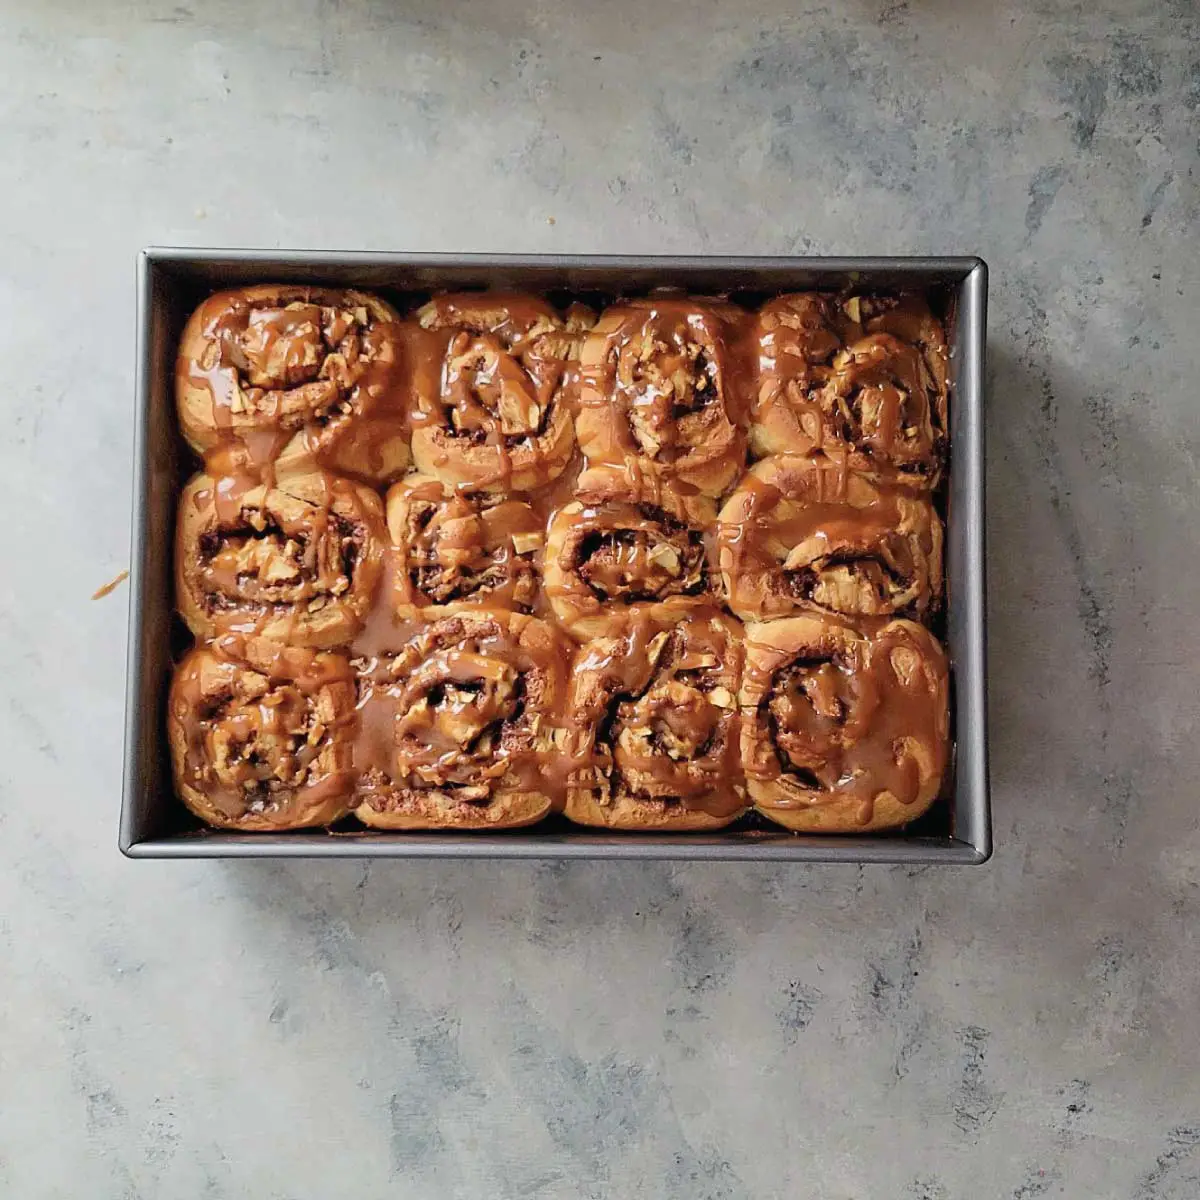 Apple cinnamon rolls in a baking dish with salted caramel drizzled over the top.